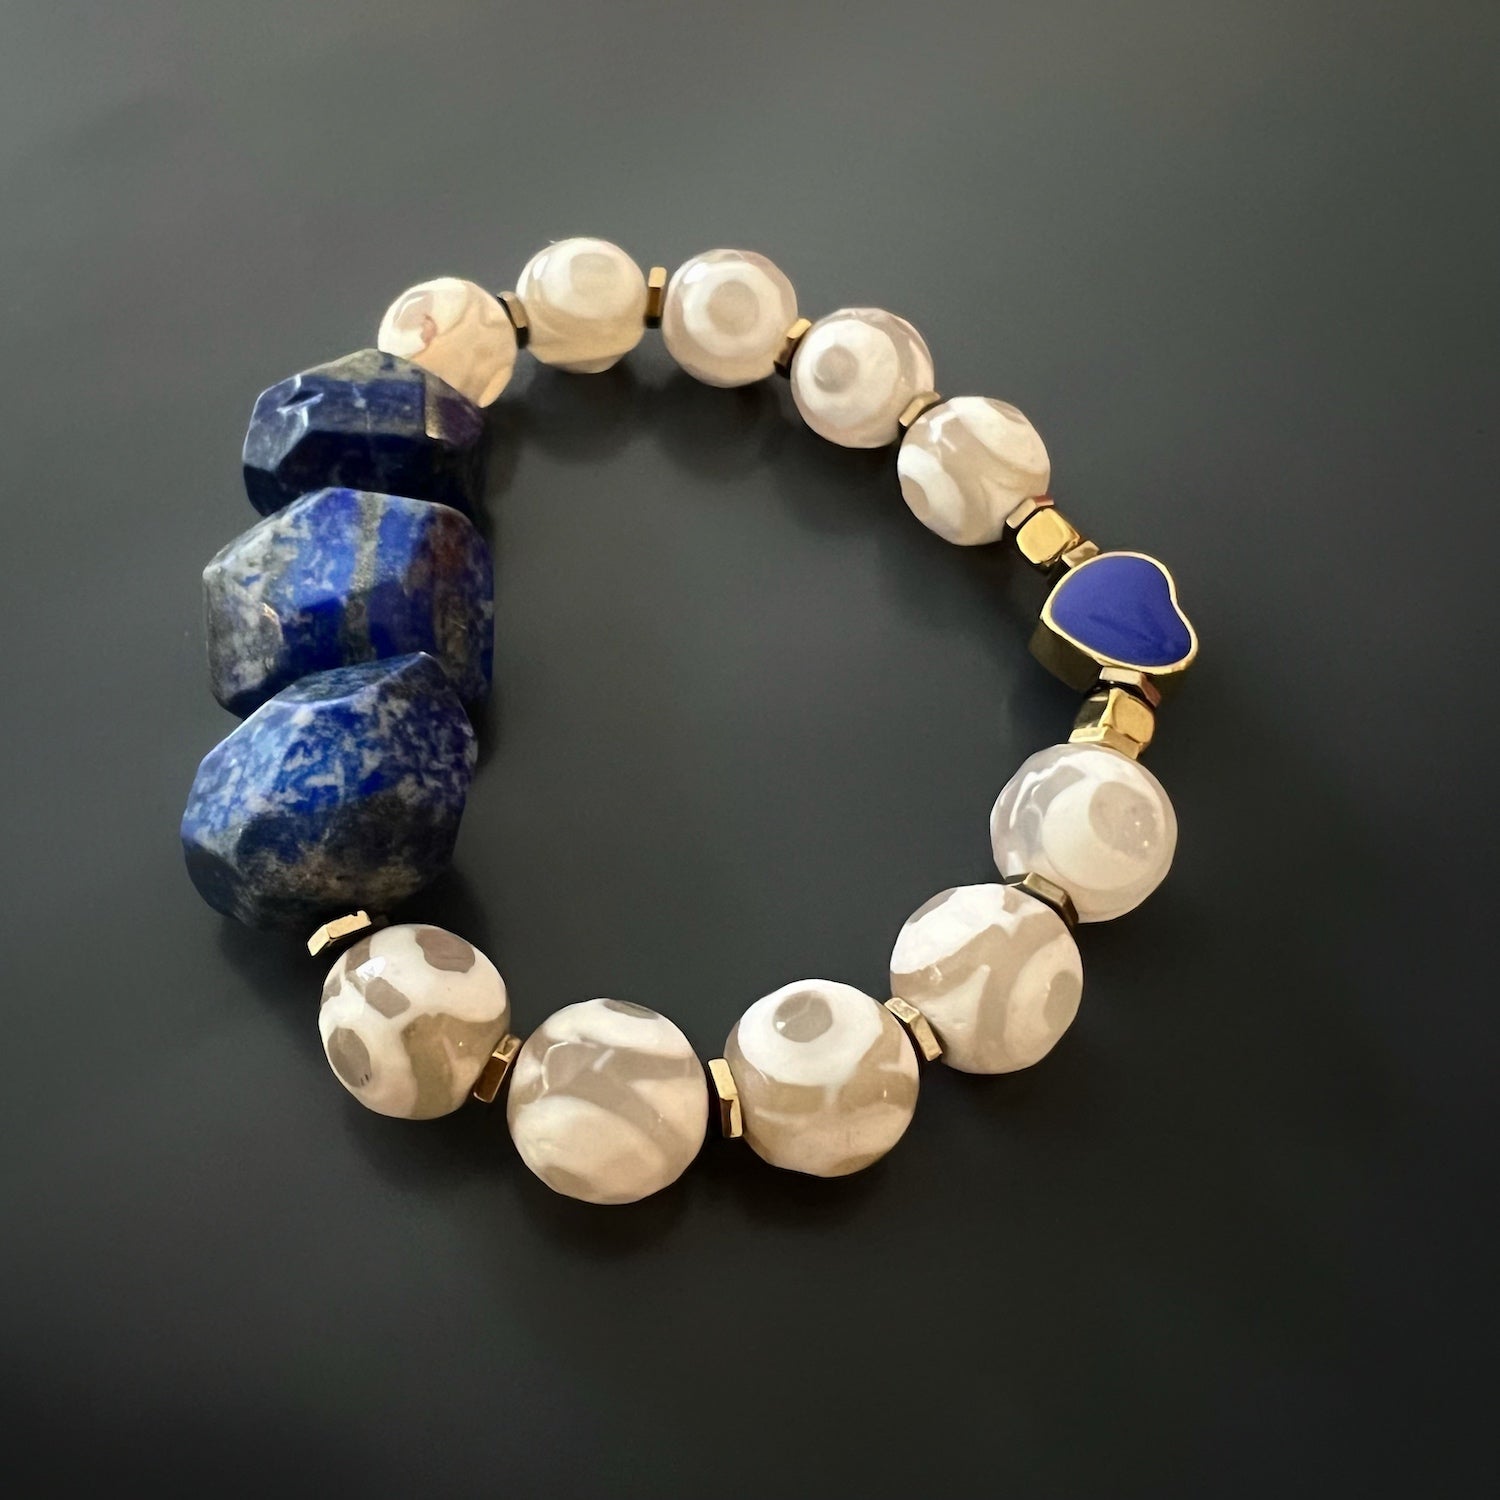 Eye-catching Lapis Lazuli Bracelet - Unique piece of handmade jewelry with deep blue Lapis Lazuli beads and a contrasting gold enamel heart.